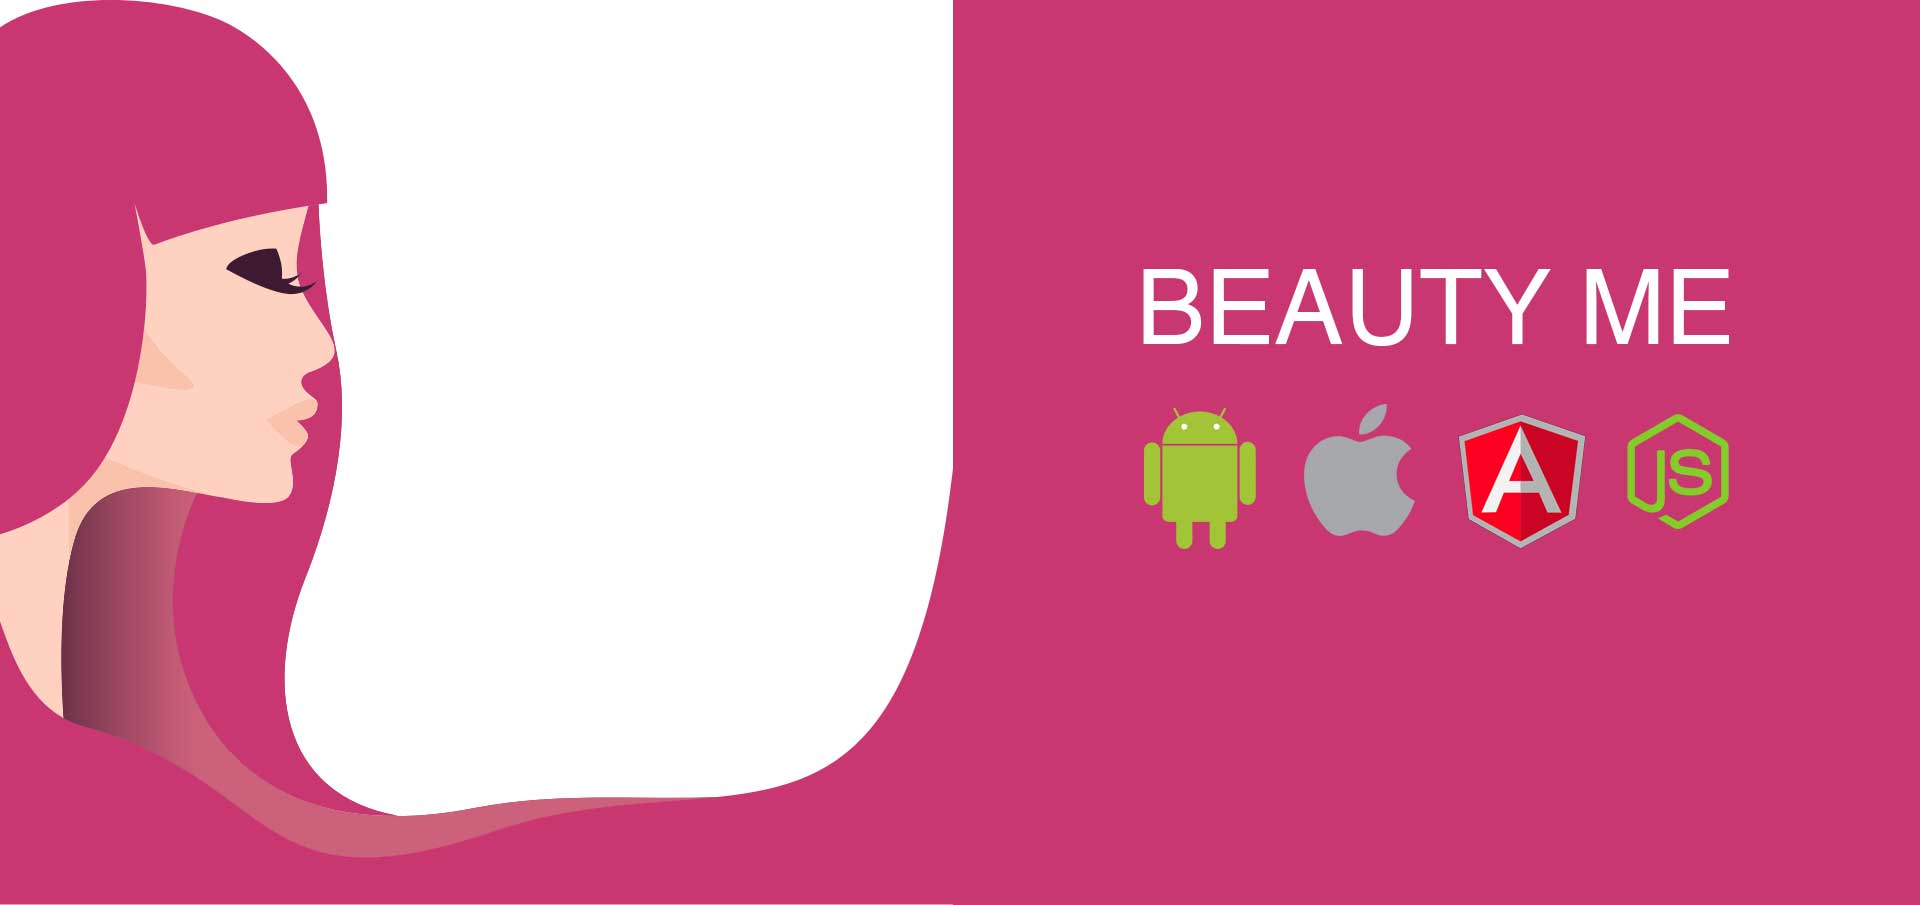 Beauty Me - A Case study for Mobile-first App